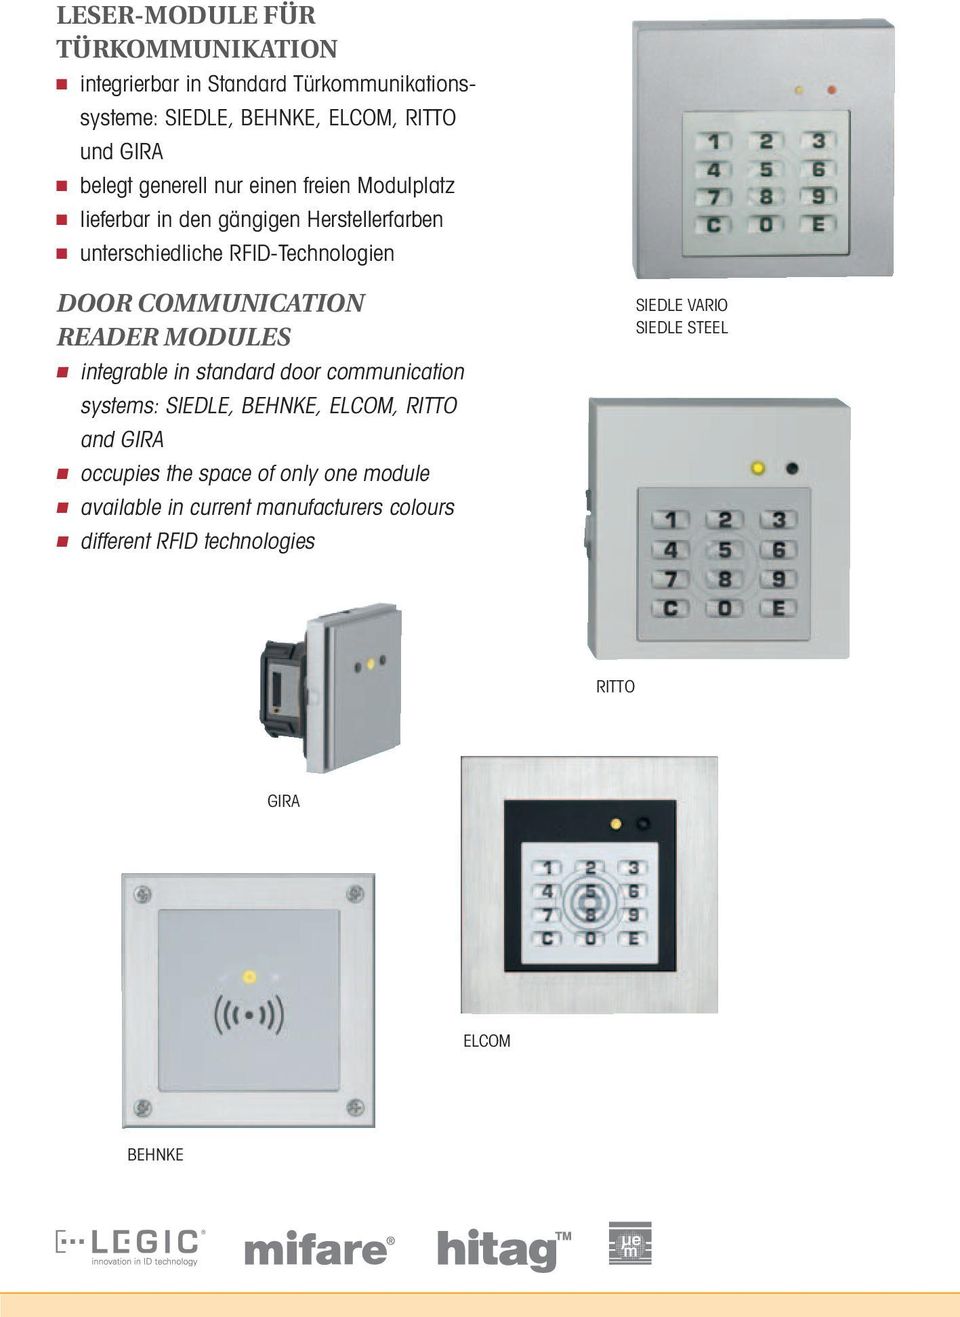 COMMUNICATION READER MODULES integrable in standard door communication systems: SIEDLE, BEHNKE, ELCOM, RITTO and GIRA occupies the